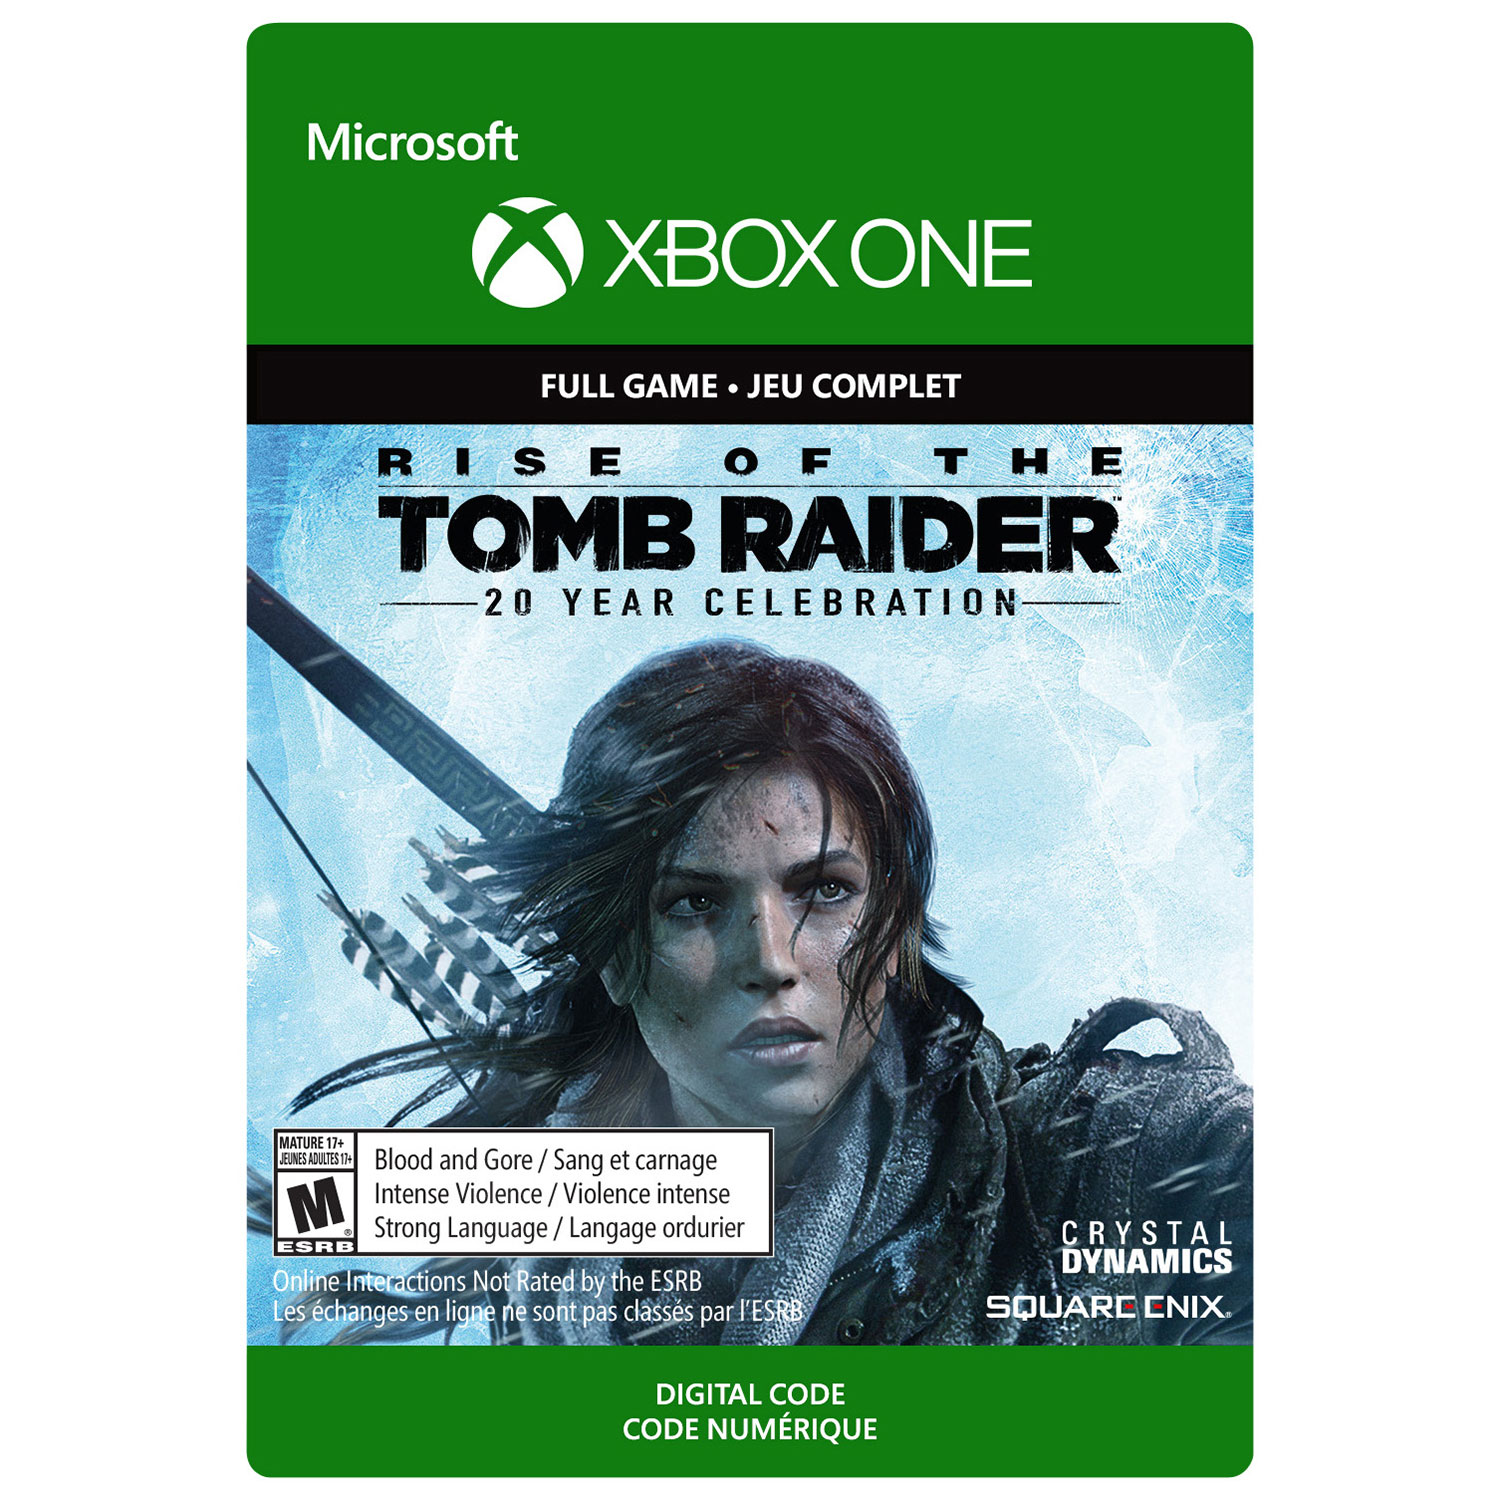 Rise of the Tomb Raider: 20 Year Celebration (Xbox One) - Digital Download